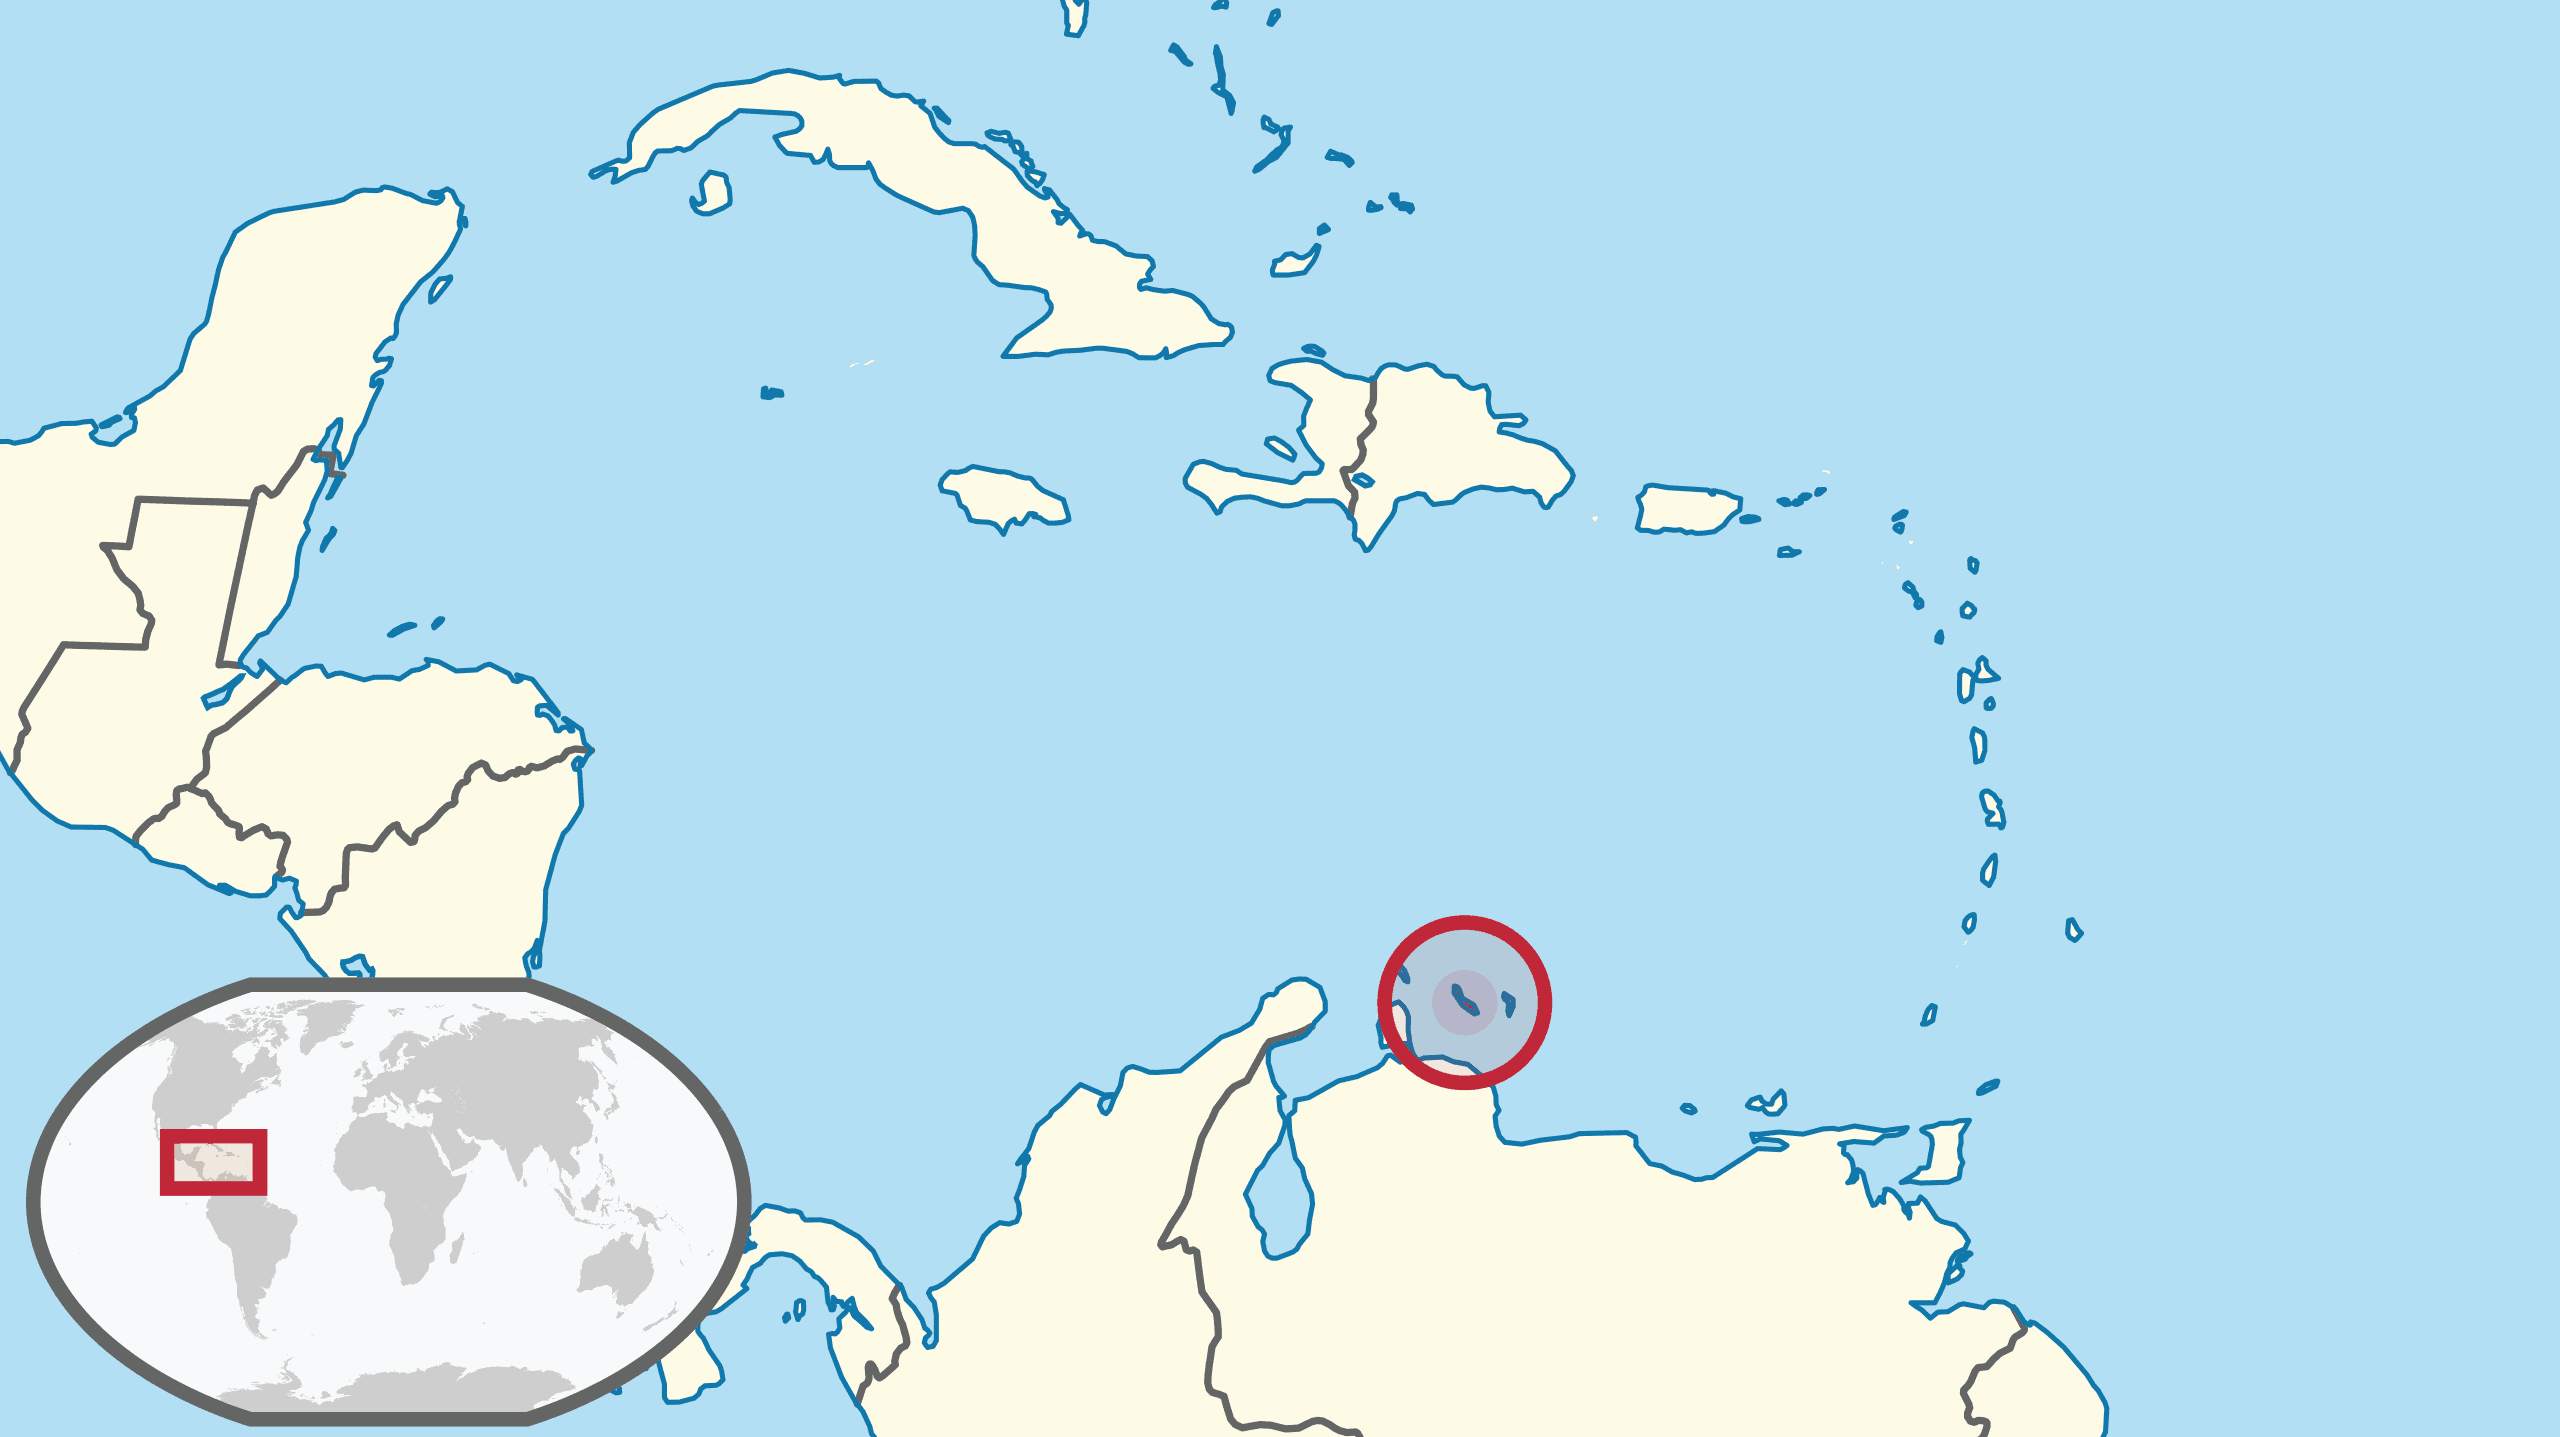 Curaçao location on the map